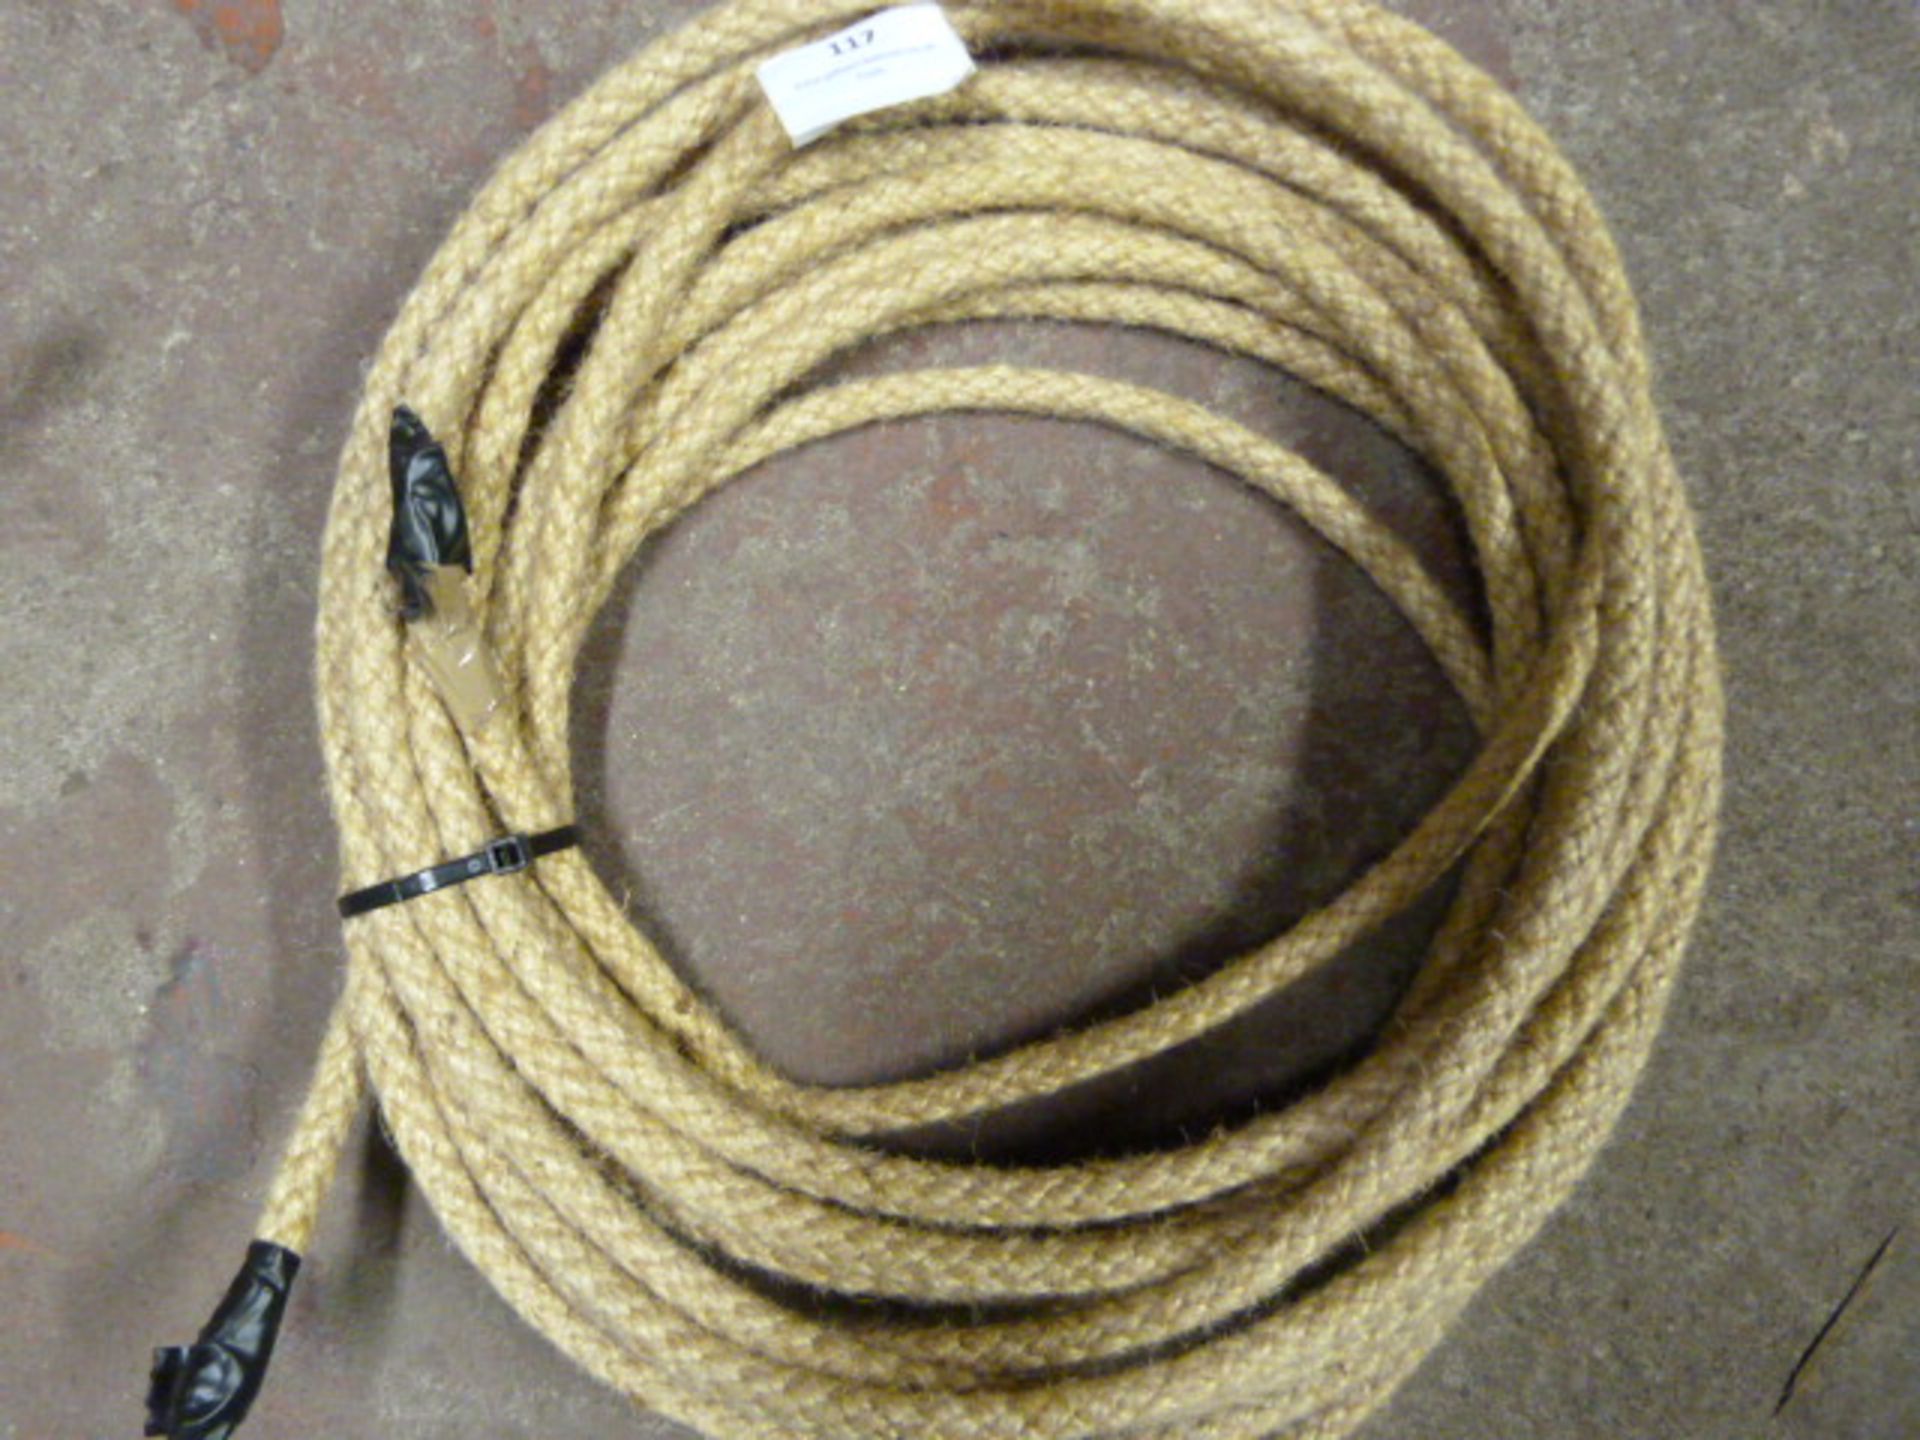 10m Length of Wire Covered with Rope